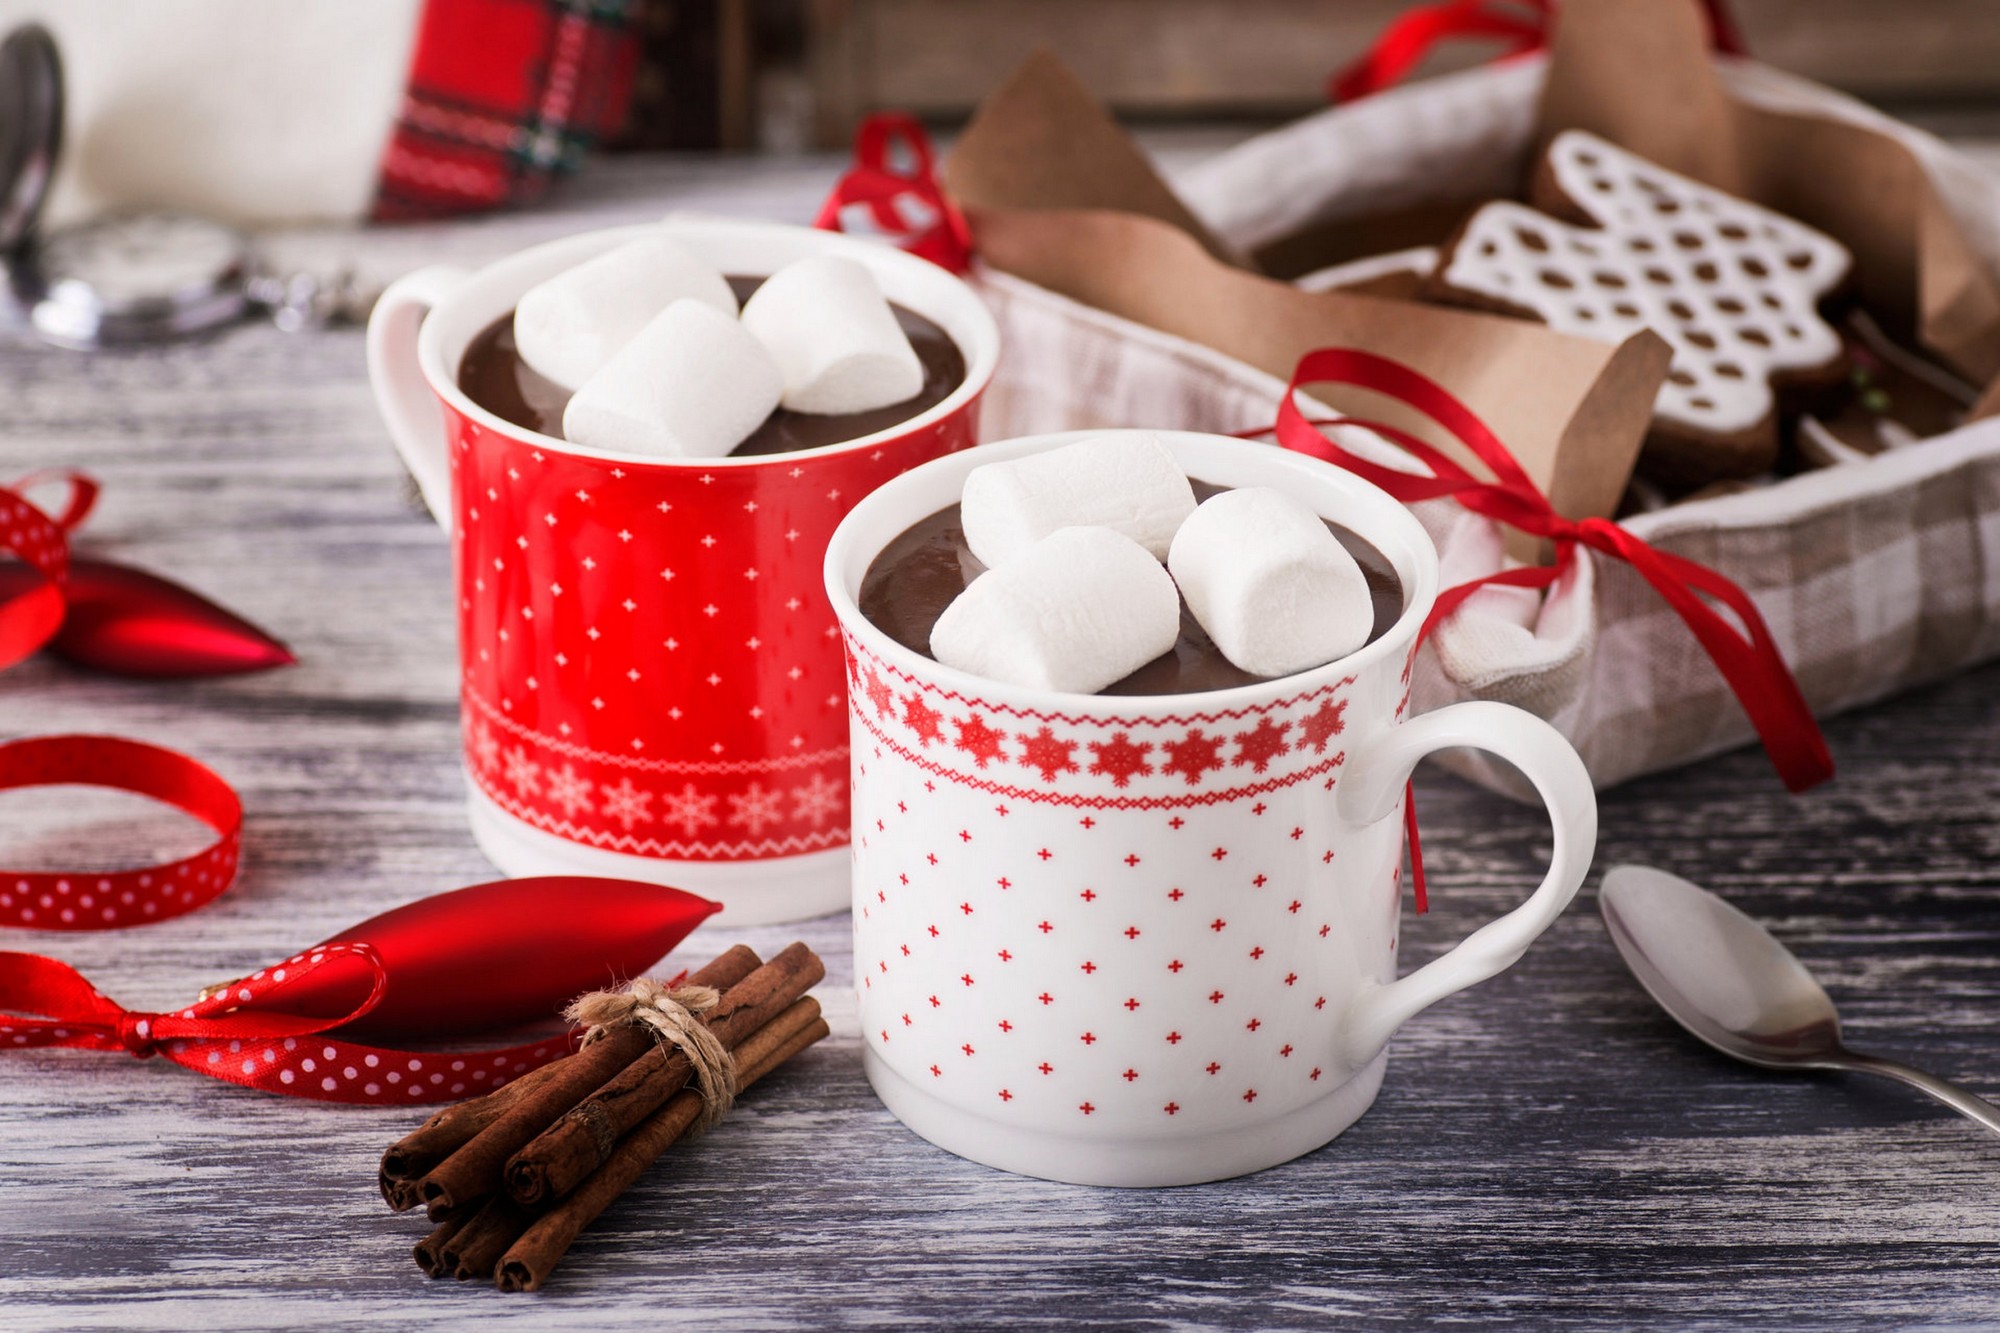 Hot Chocolate - Christmas Hot Chocolate Backgrounds , HD Wallpaper & Backgrounds